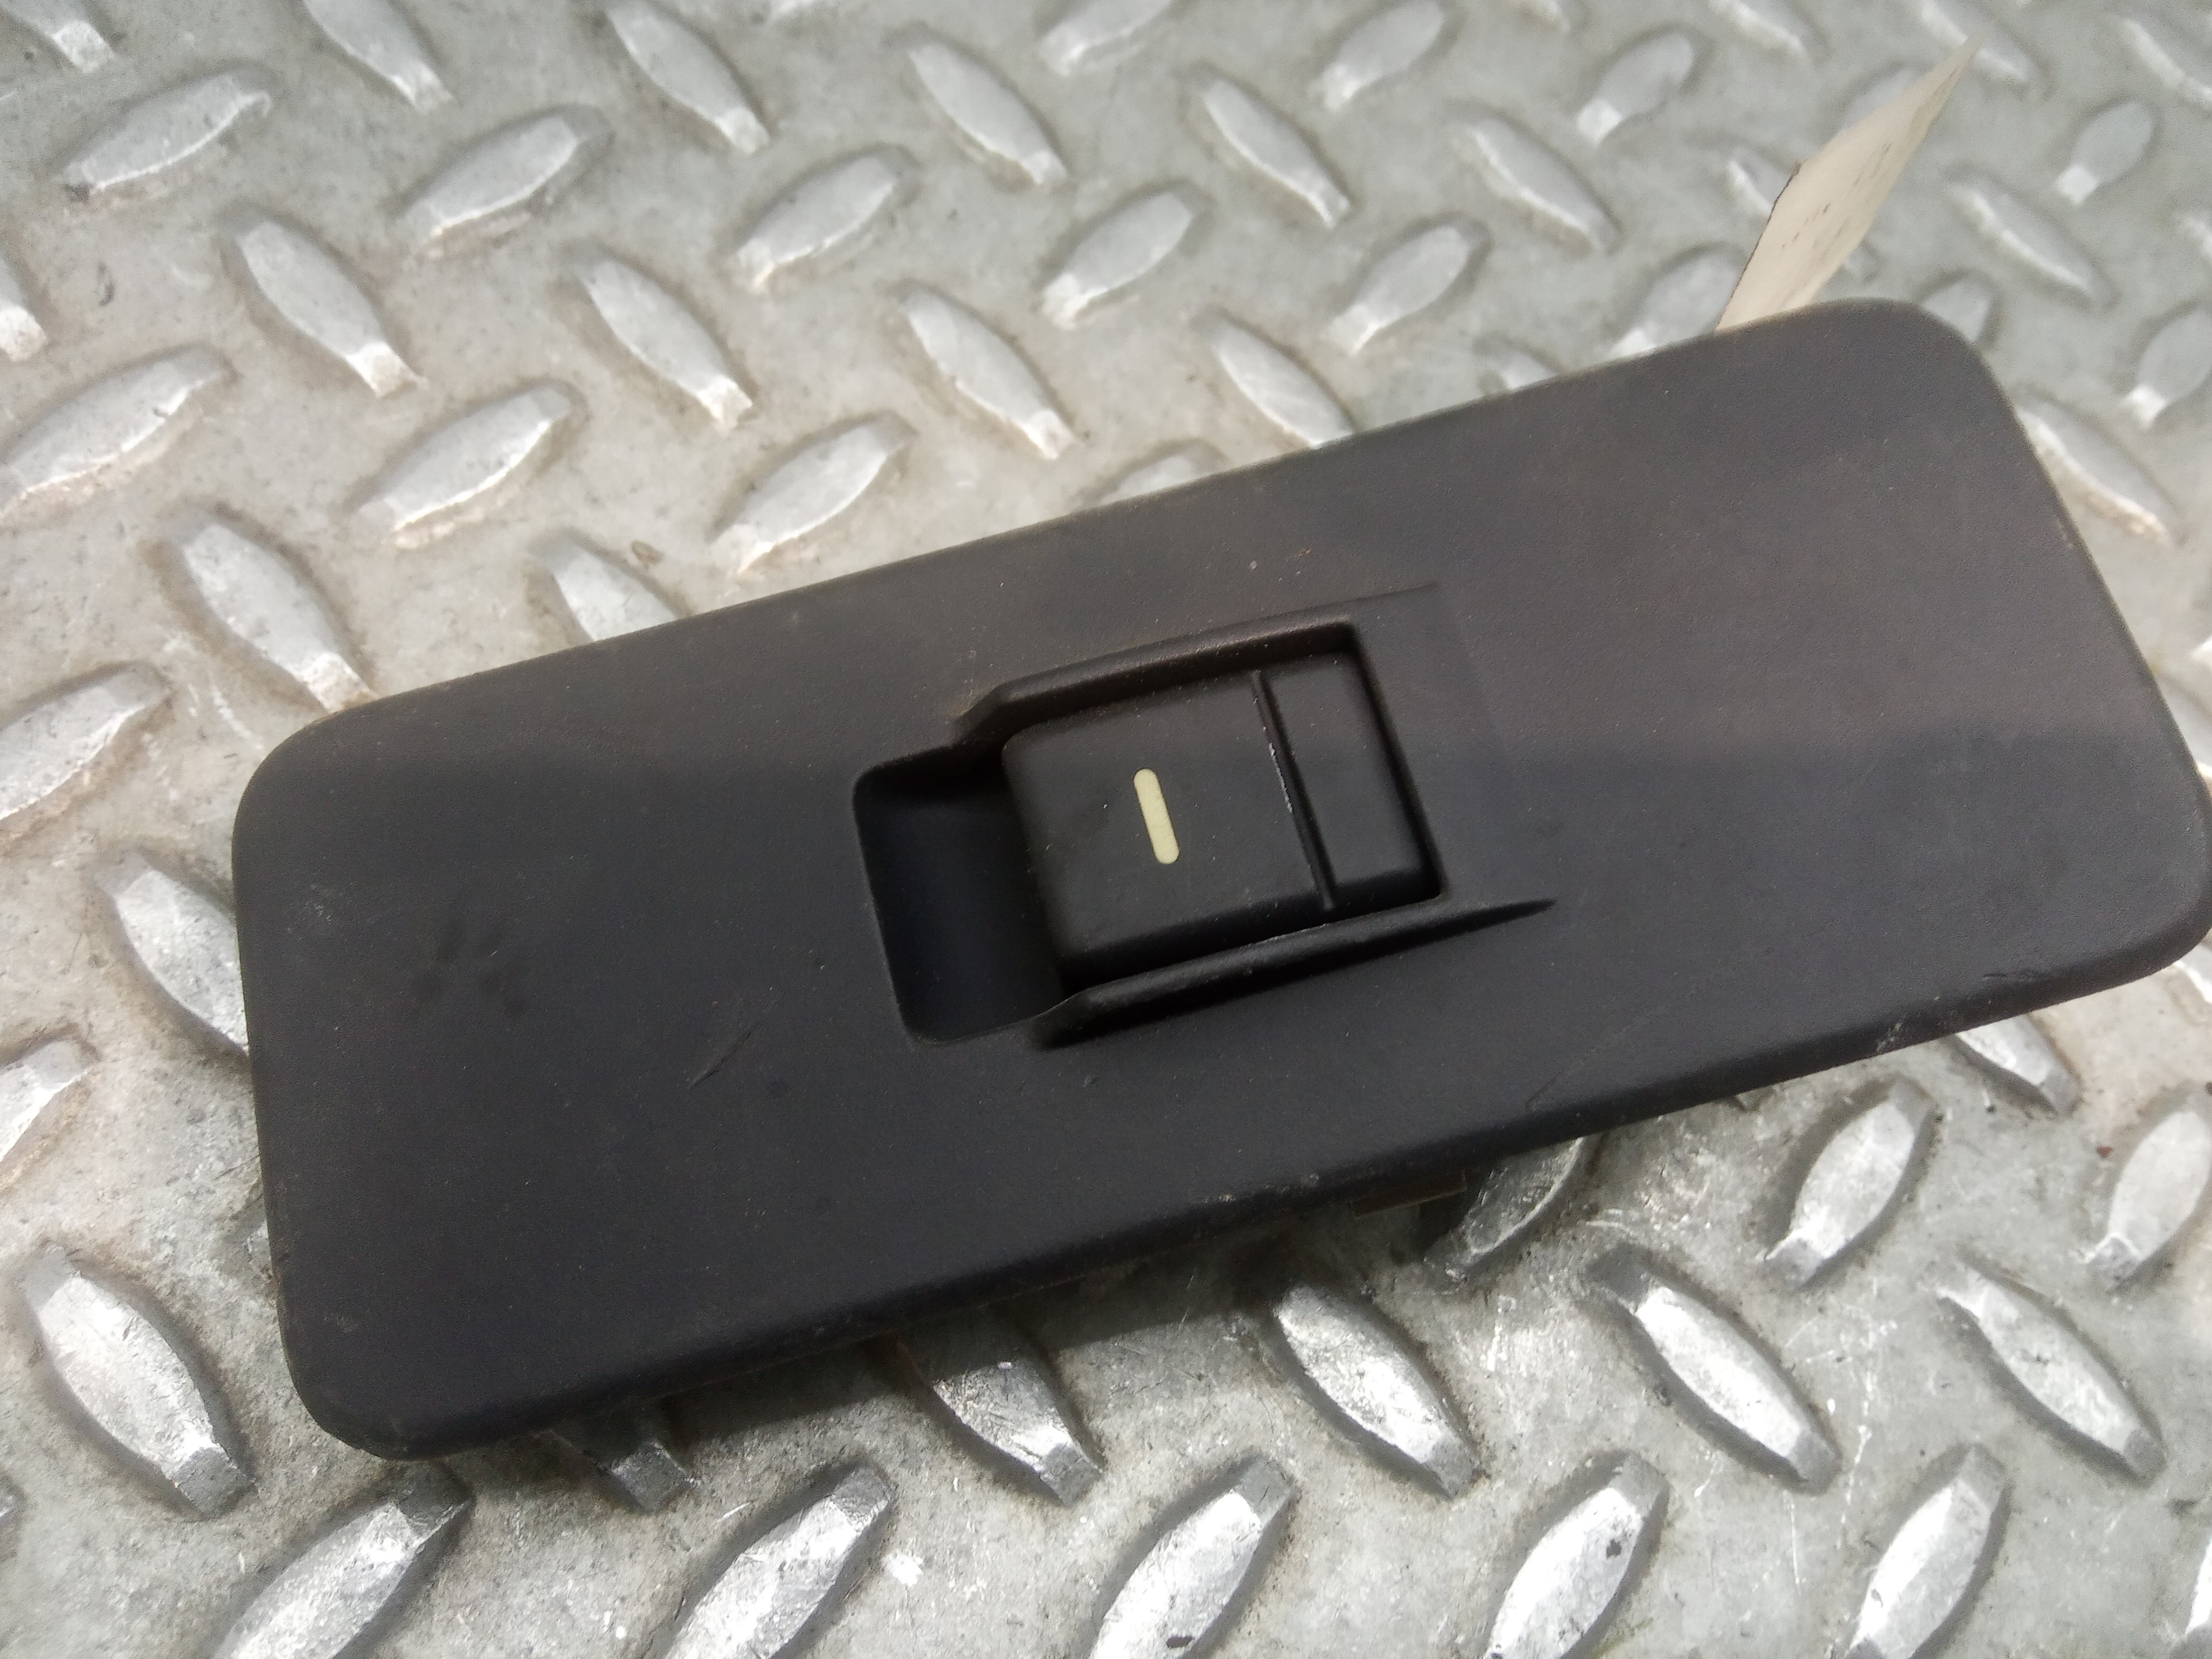 LAND ROVER Discovery 3 generation (2004-2009) Front Right Door Window Switch YUD501070PVJ 23670143